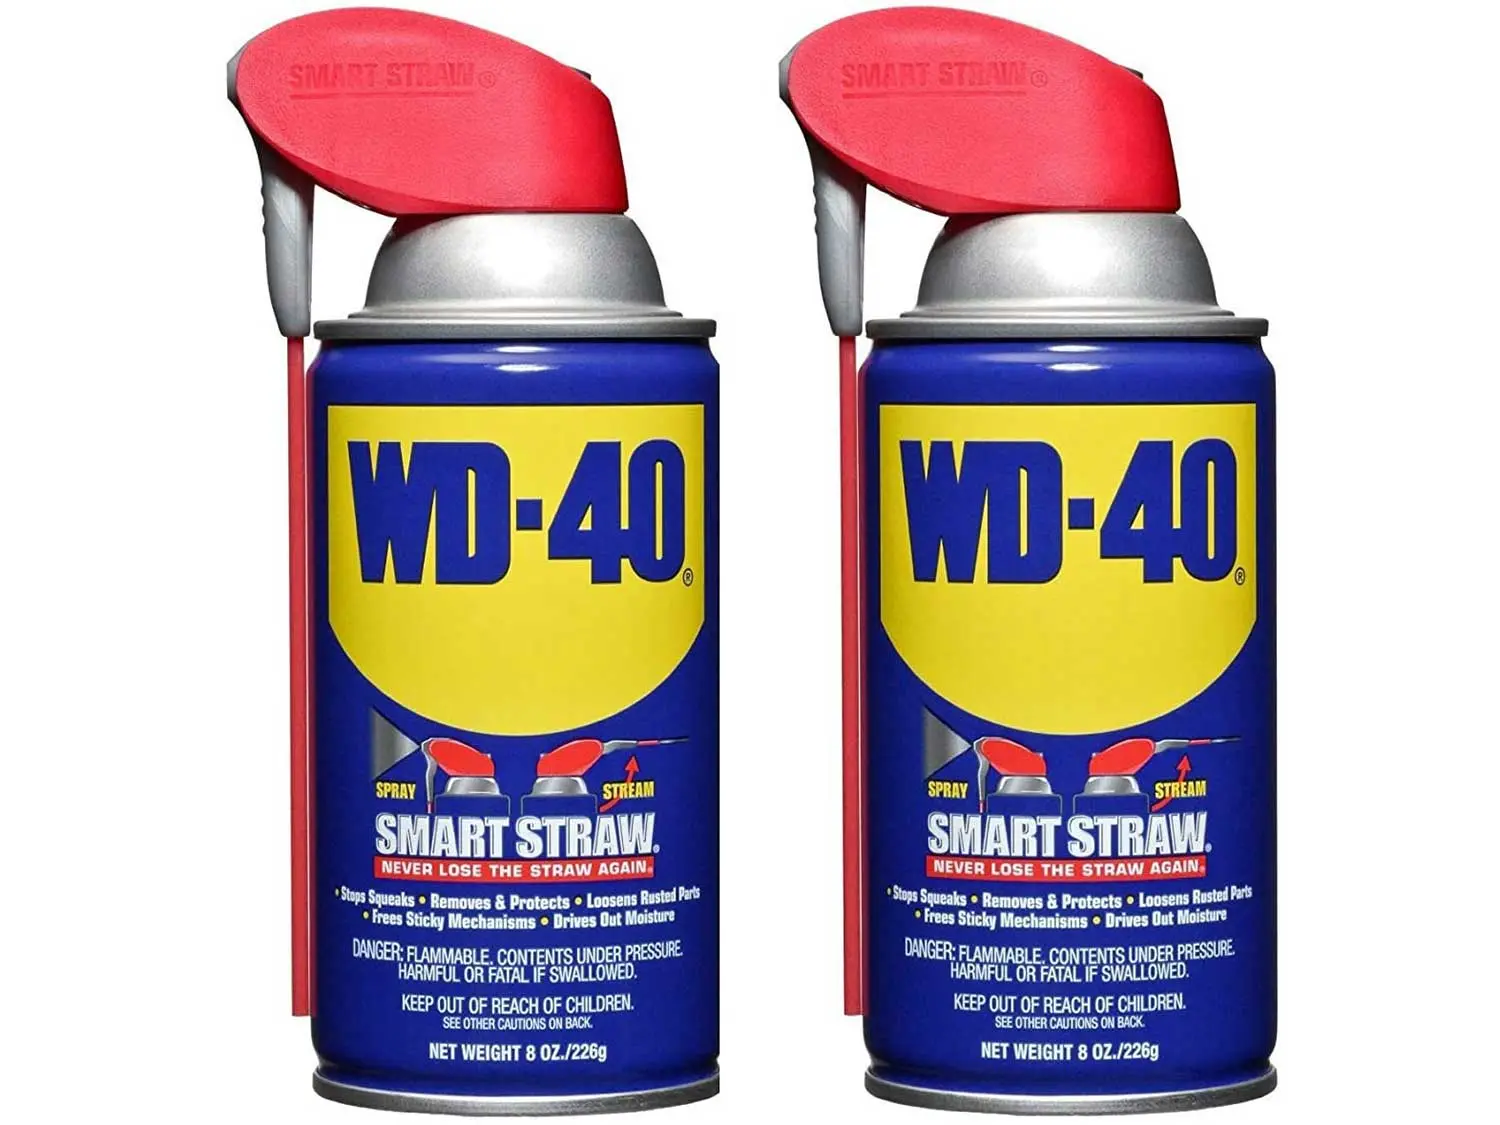 Two cans of WD-40